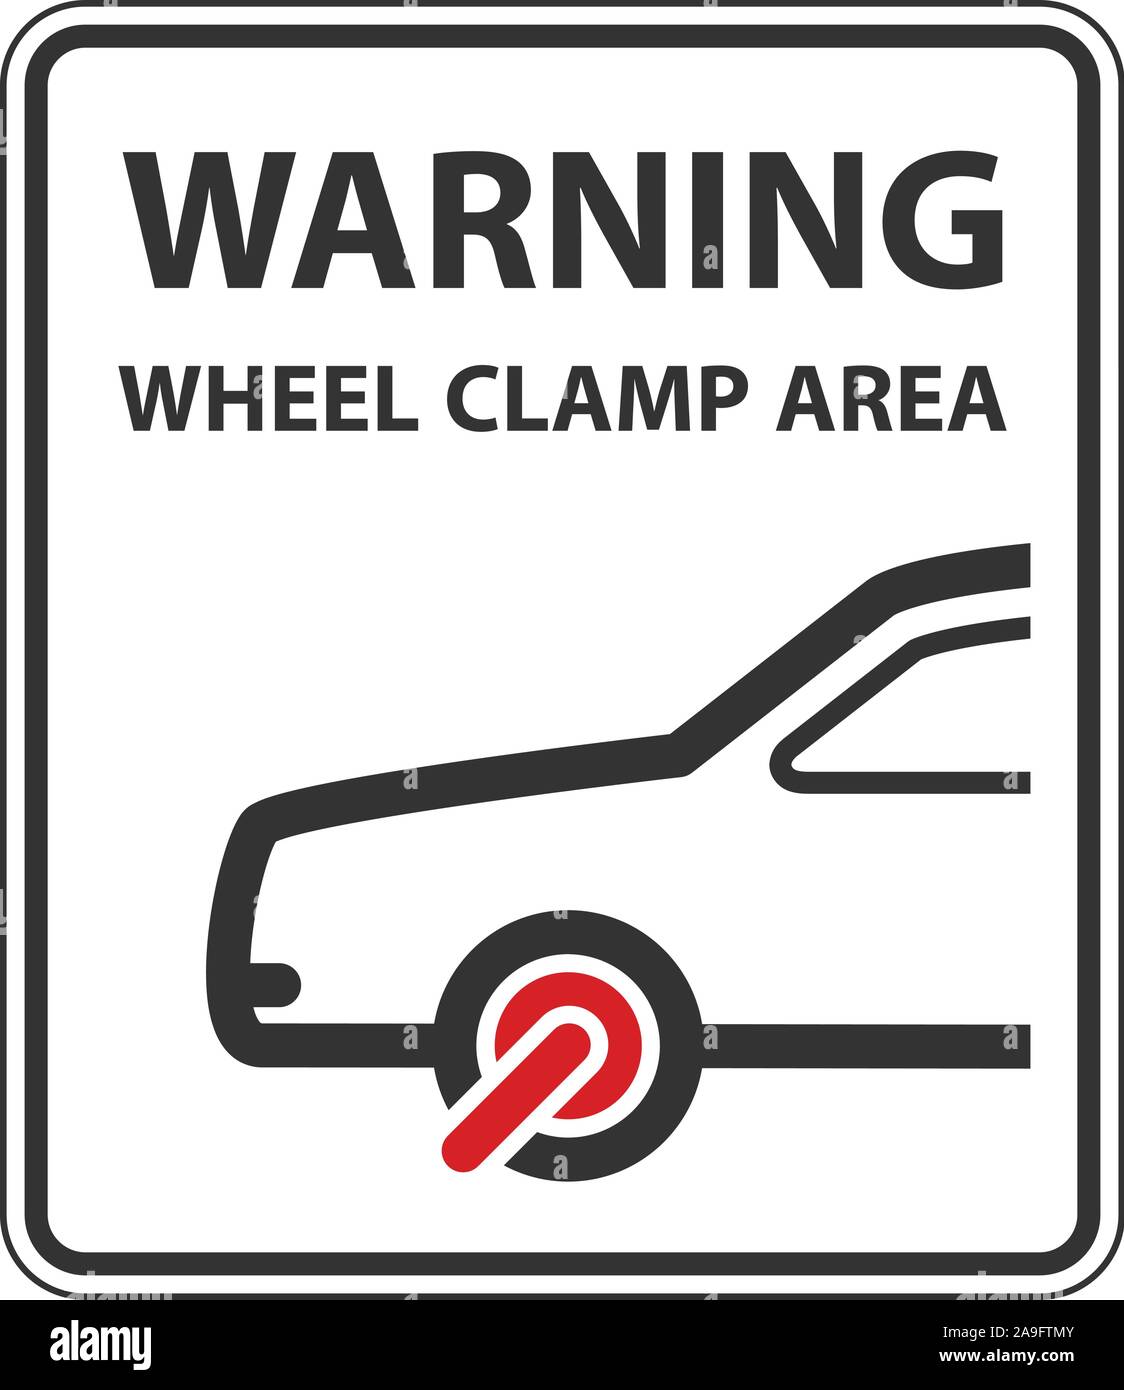 LARGE WHEEL CLAMPING SIGN Security No Parking 